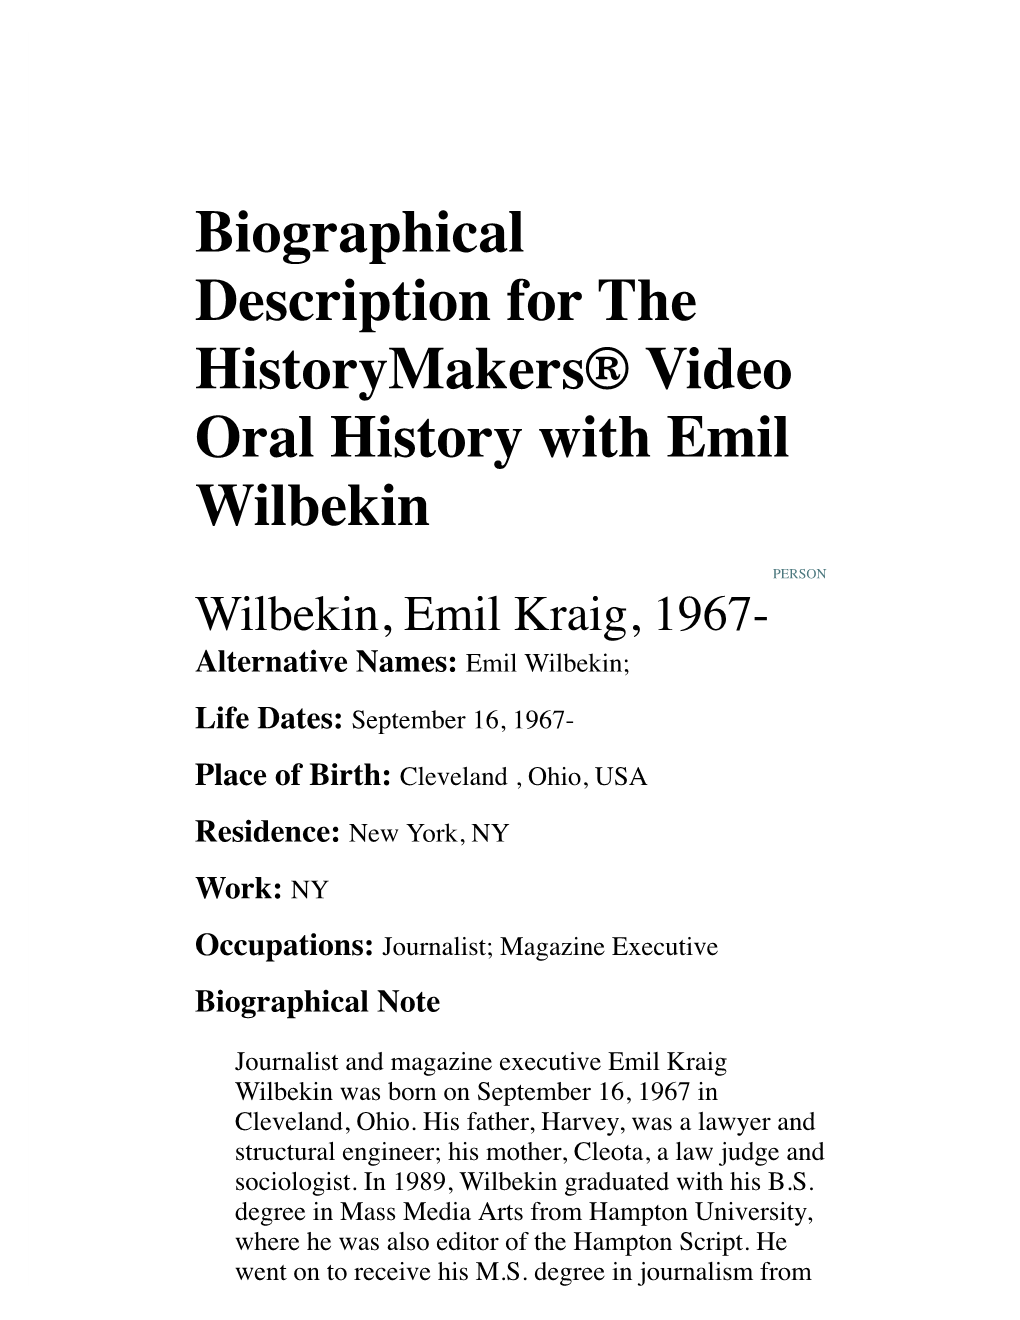 Biographical Description for the Historymakers® Video Oral History with Emil Wilbekin